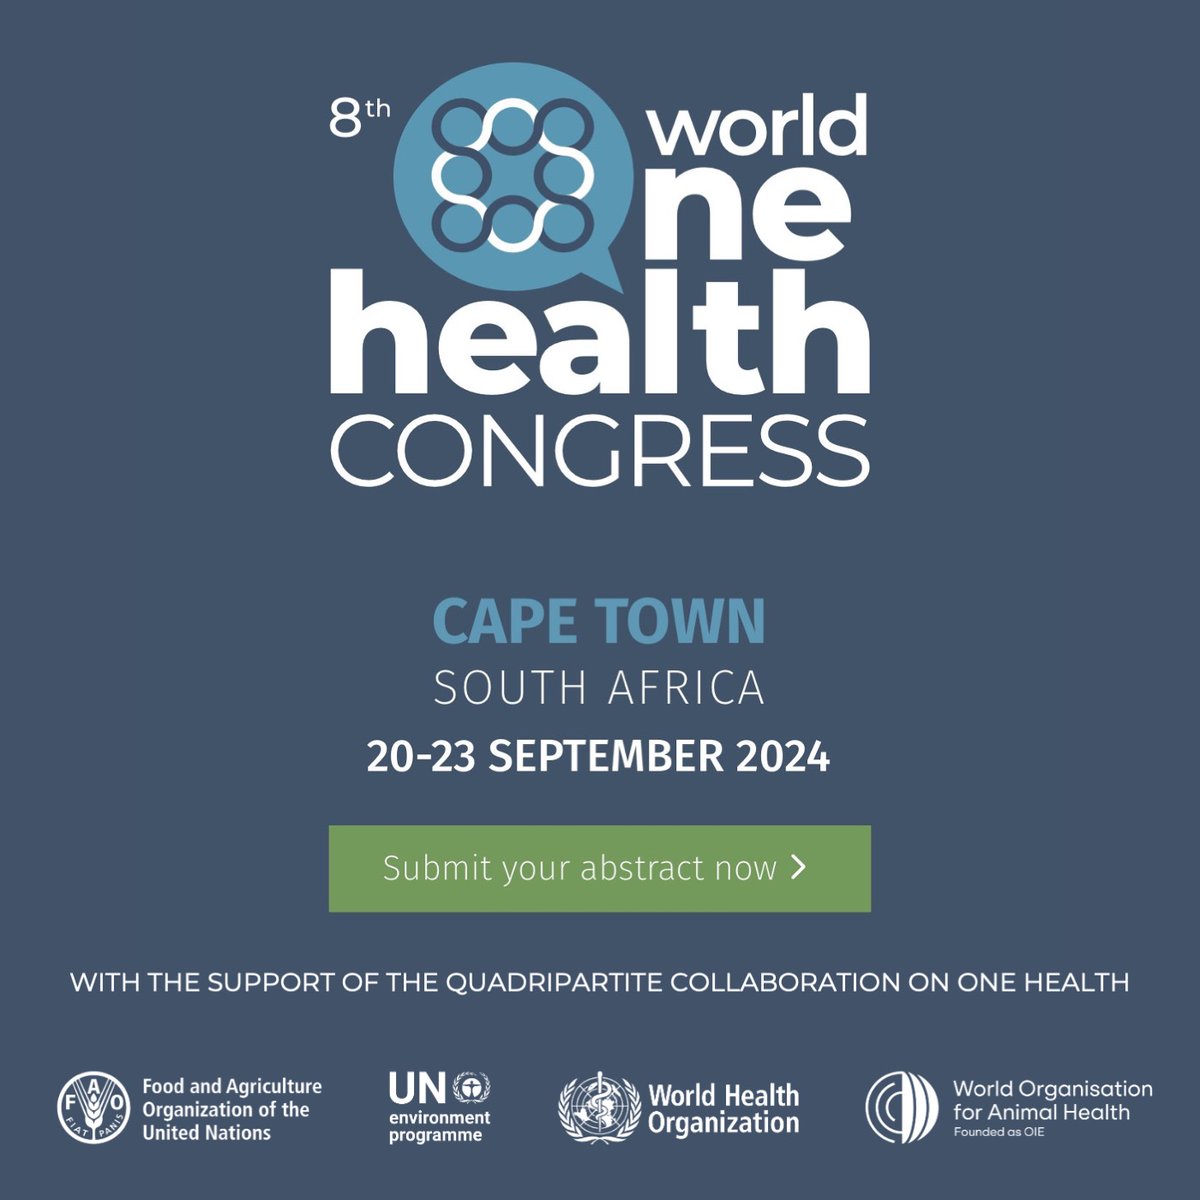 Abstracts are being accepted for the World One Health Congress

🗓️20 - 23 September 2024 in Cape Town, South Africa!

Grants are available to encourage participation of delegates from low & middle income countries.

More info: globalohc.org/8WOHC

#OneHealth #WOHC2024